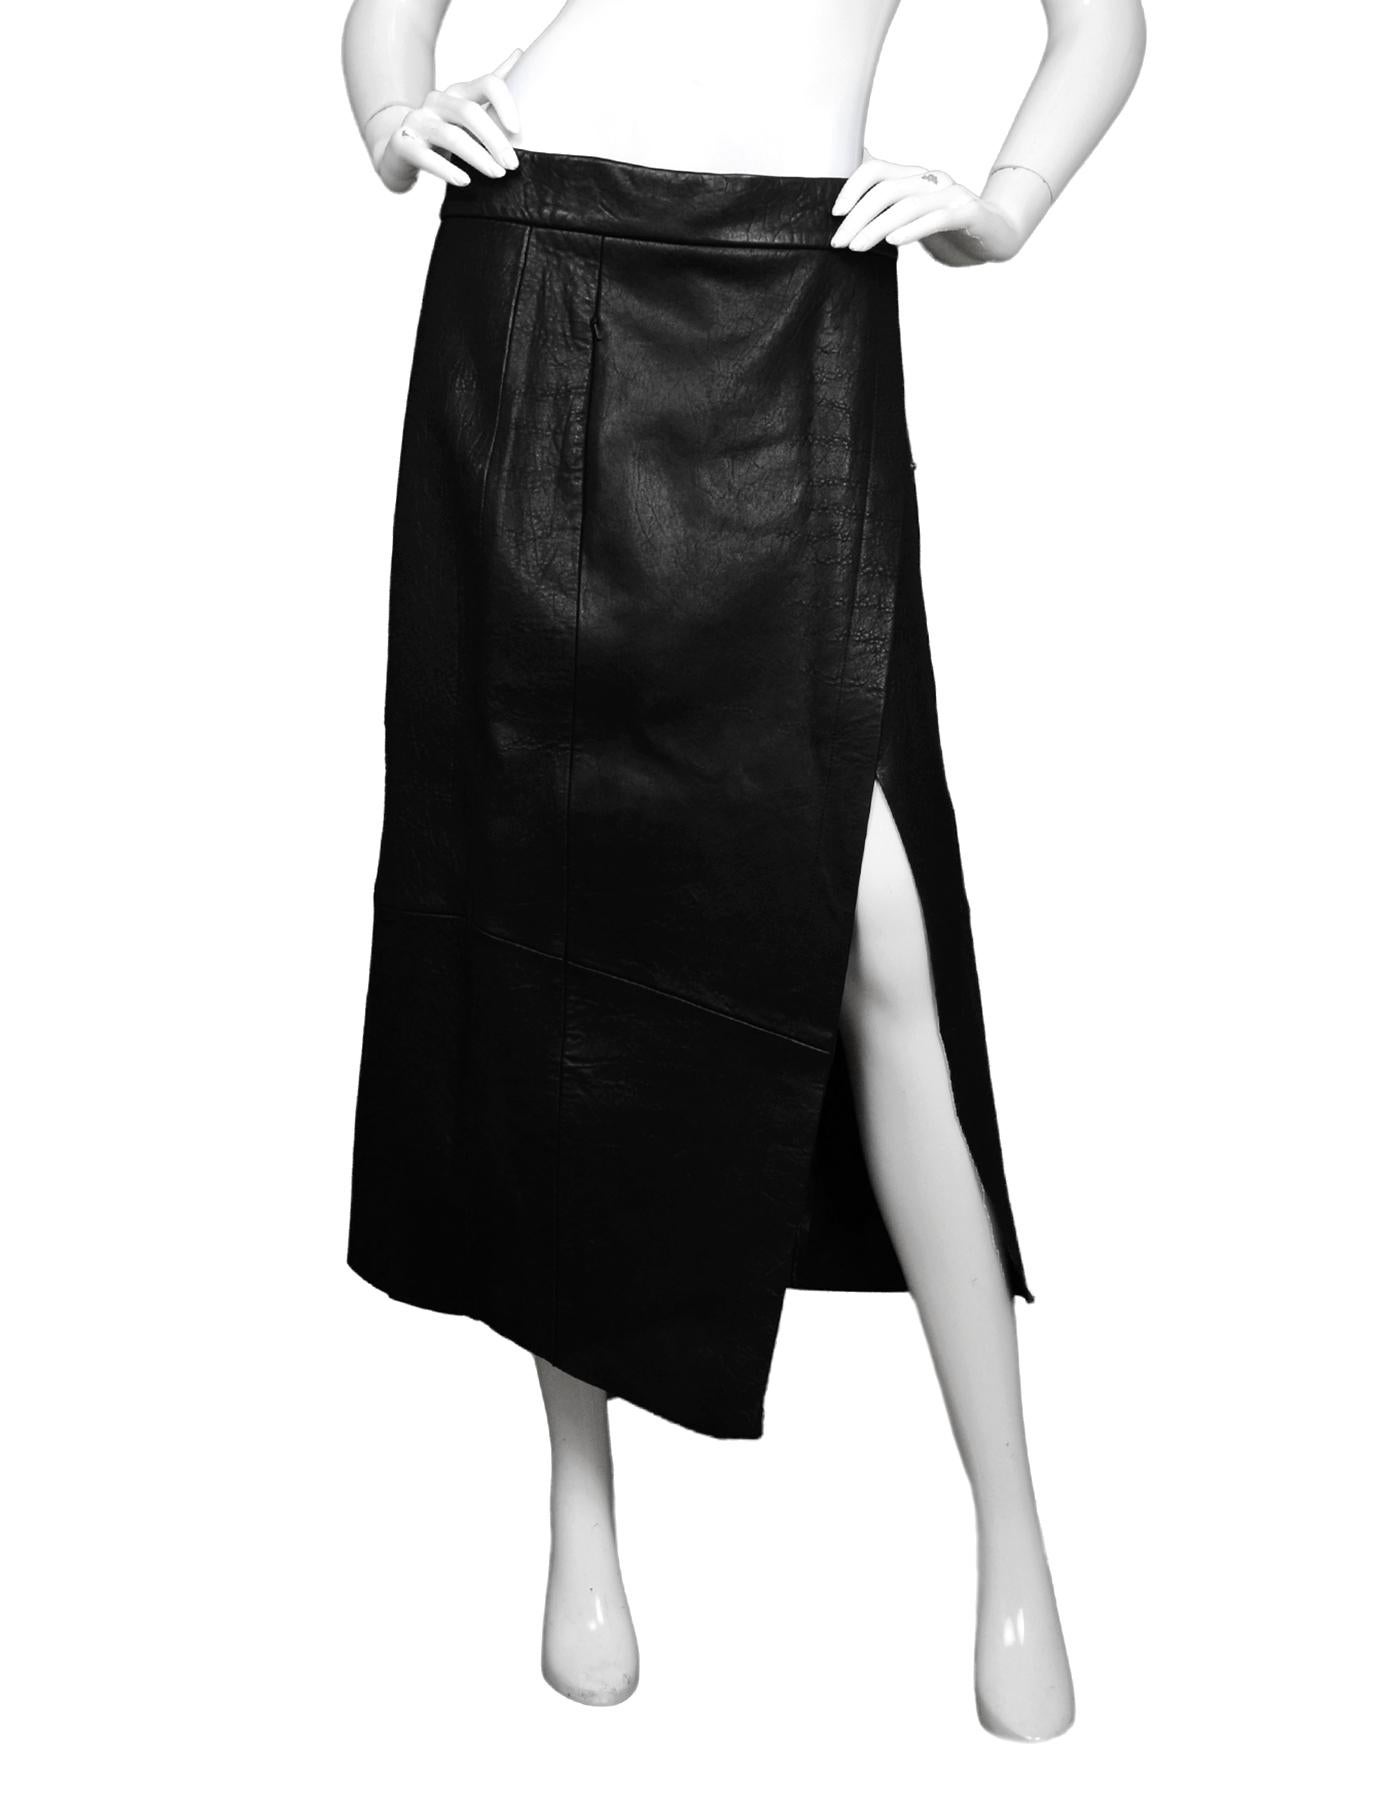 Veda Black Leather Crosby Midi Wrap Skirt Sz L

Made In: China
Color: Black
Materials: 100% lamb leather 
Lining: 100% polyester
Closure/Opening: Snap wrap front
Overall Condition: Excellent condition with original tags attached
Estimated Retail: